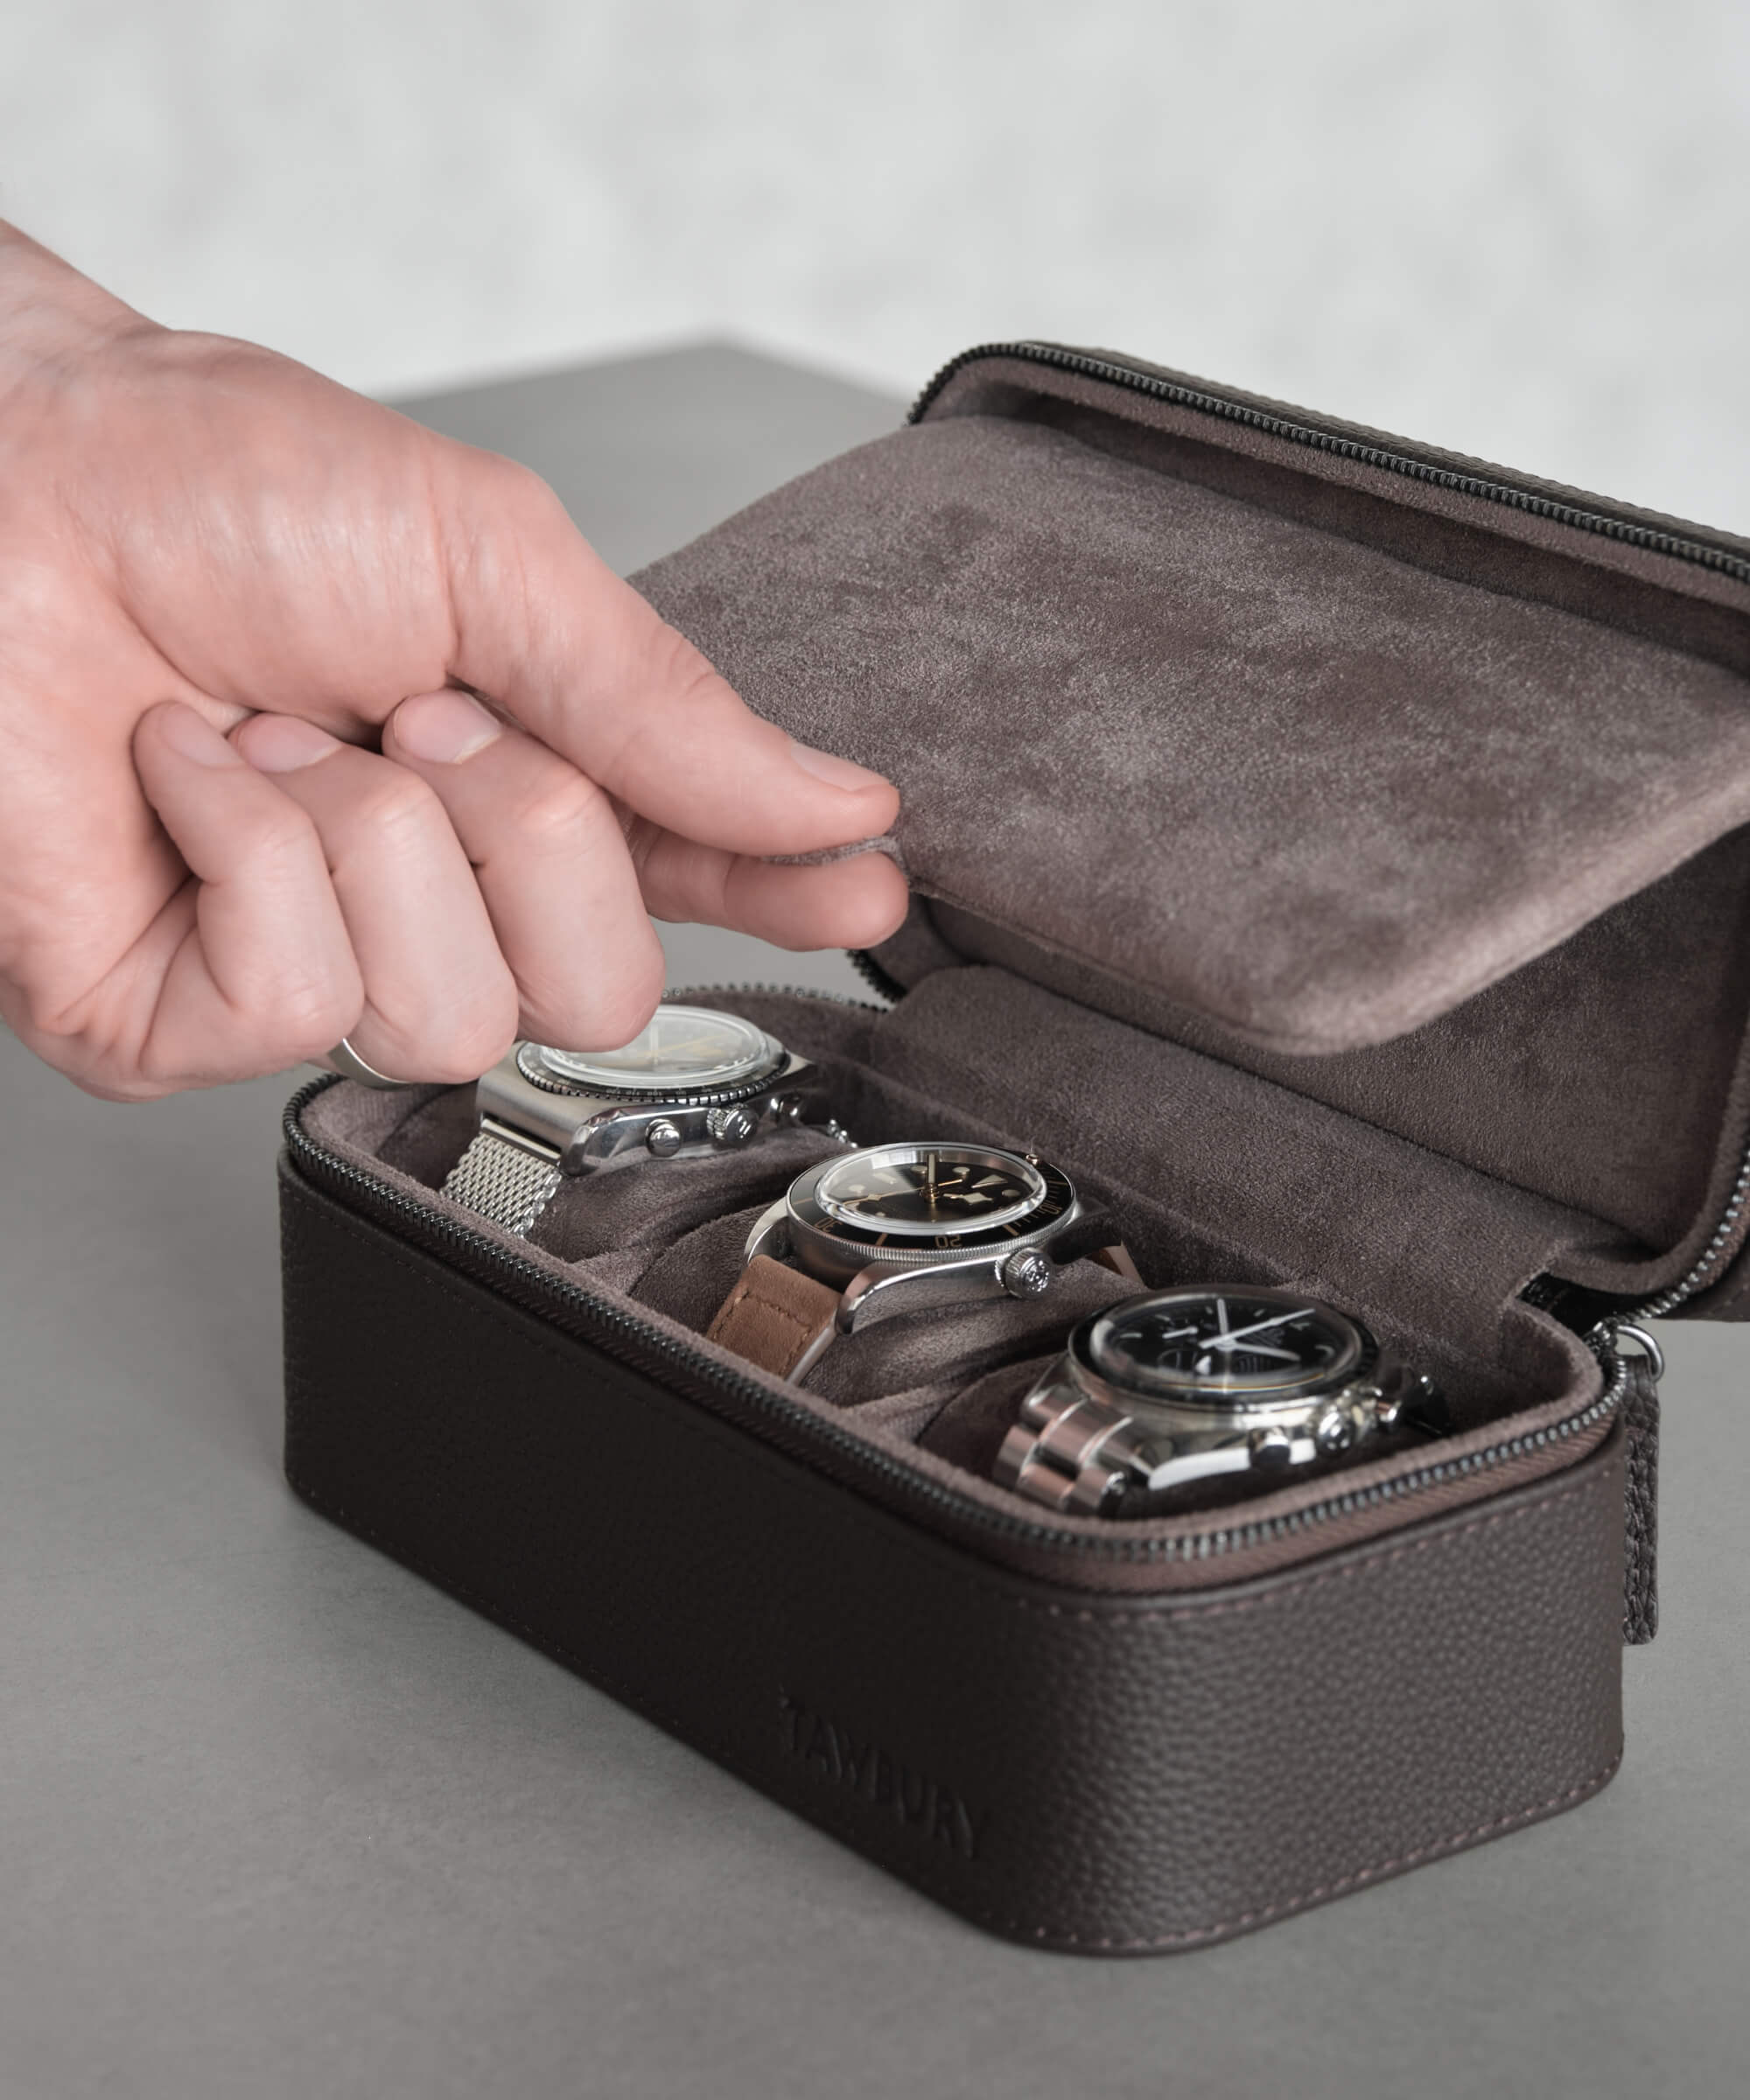 The TAWBURY Fraser 3 Watch Travel Case - Brown offers a sleek black travel case made from genuine leather. It features red stitching accents and a convenient carrying handle. The case includes a watch cushion that securely holds up to three timepieces.